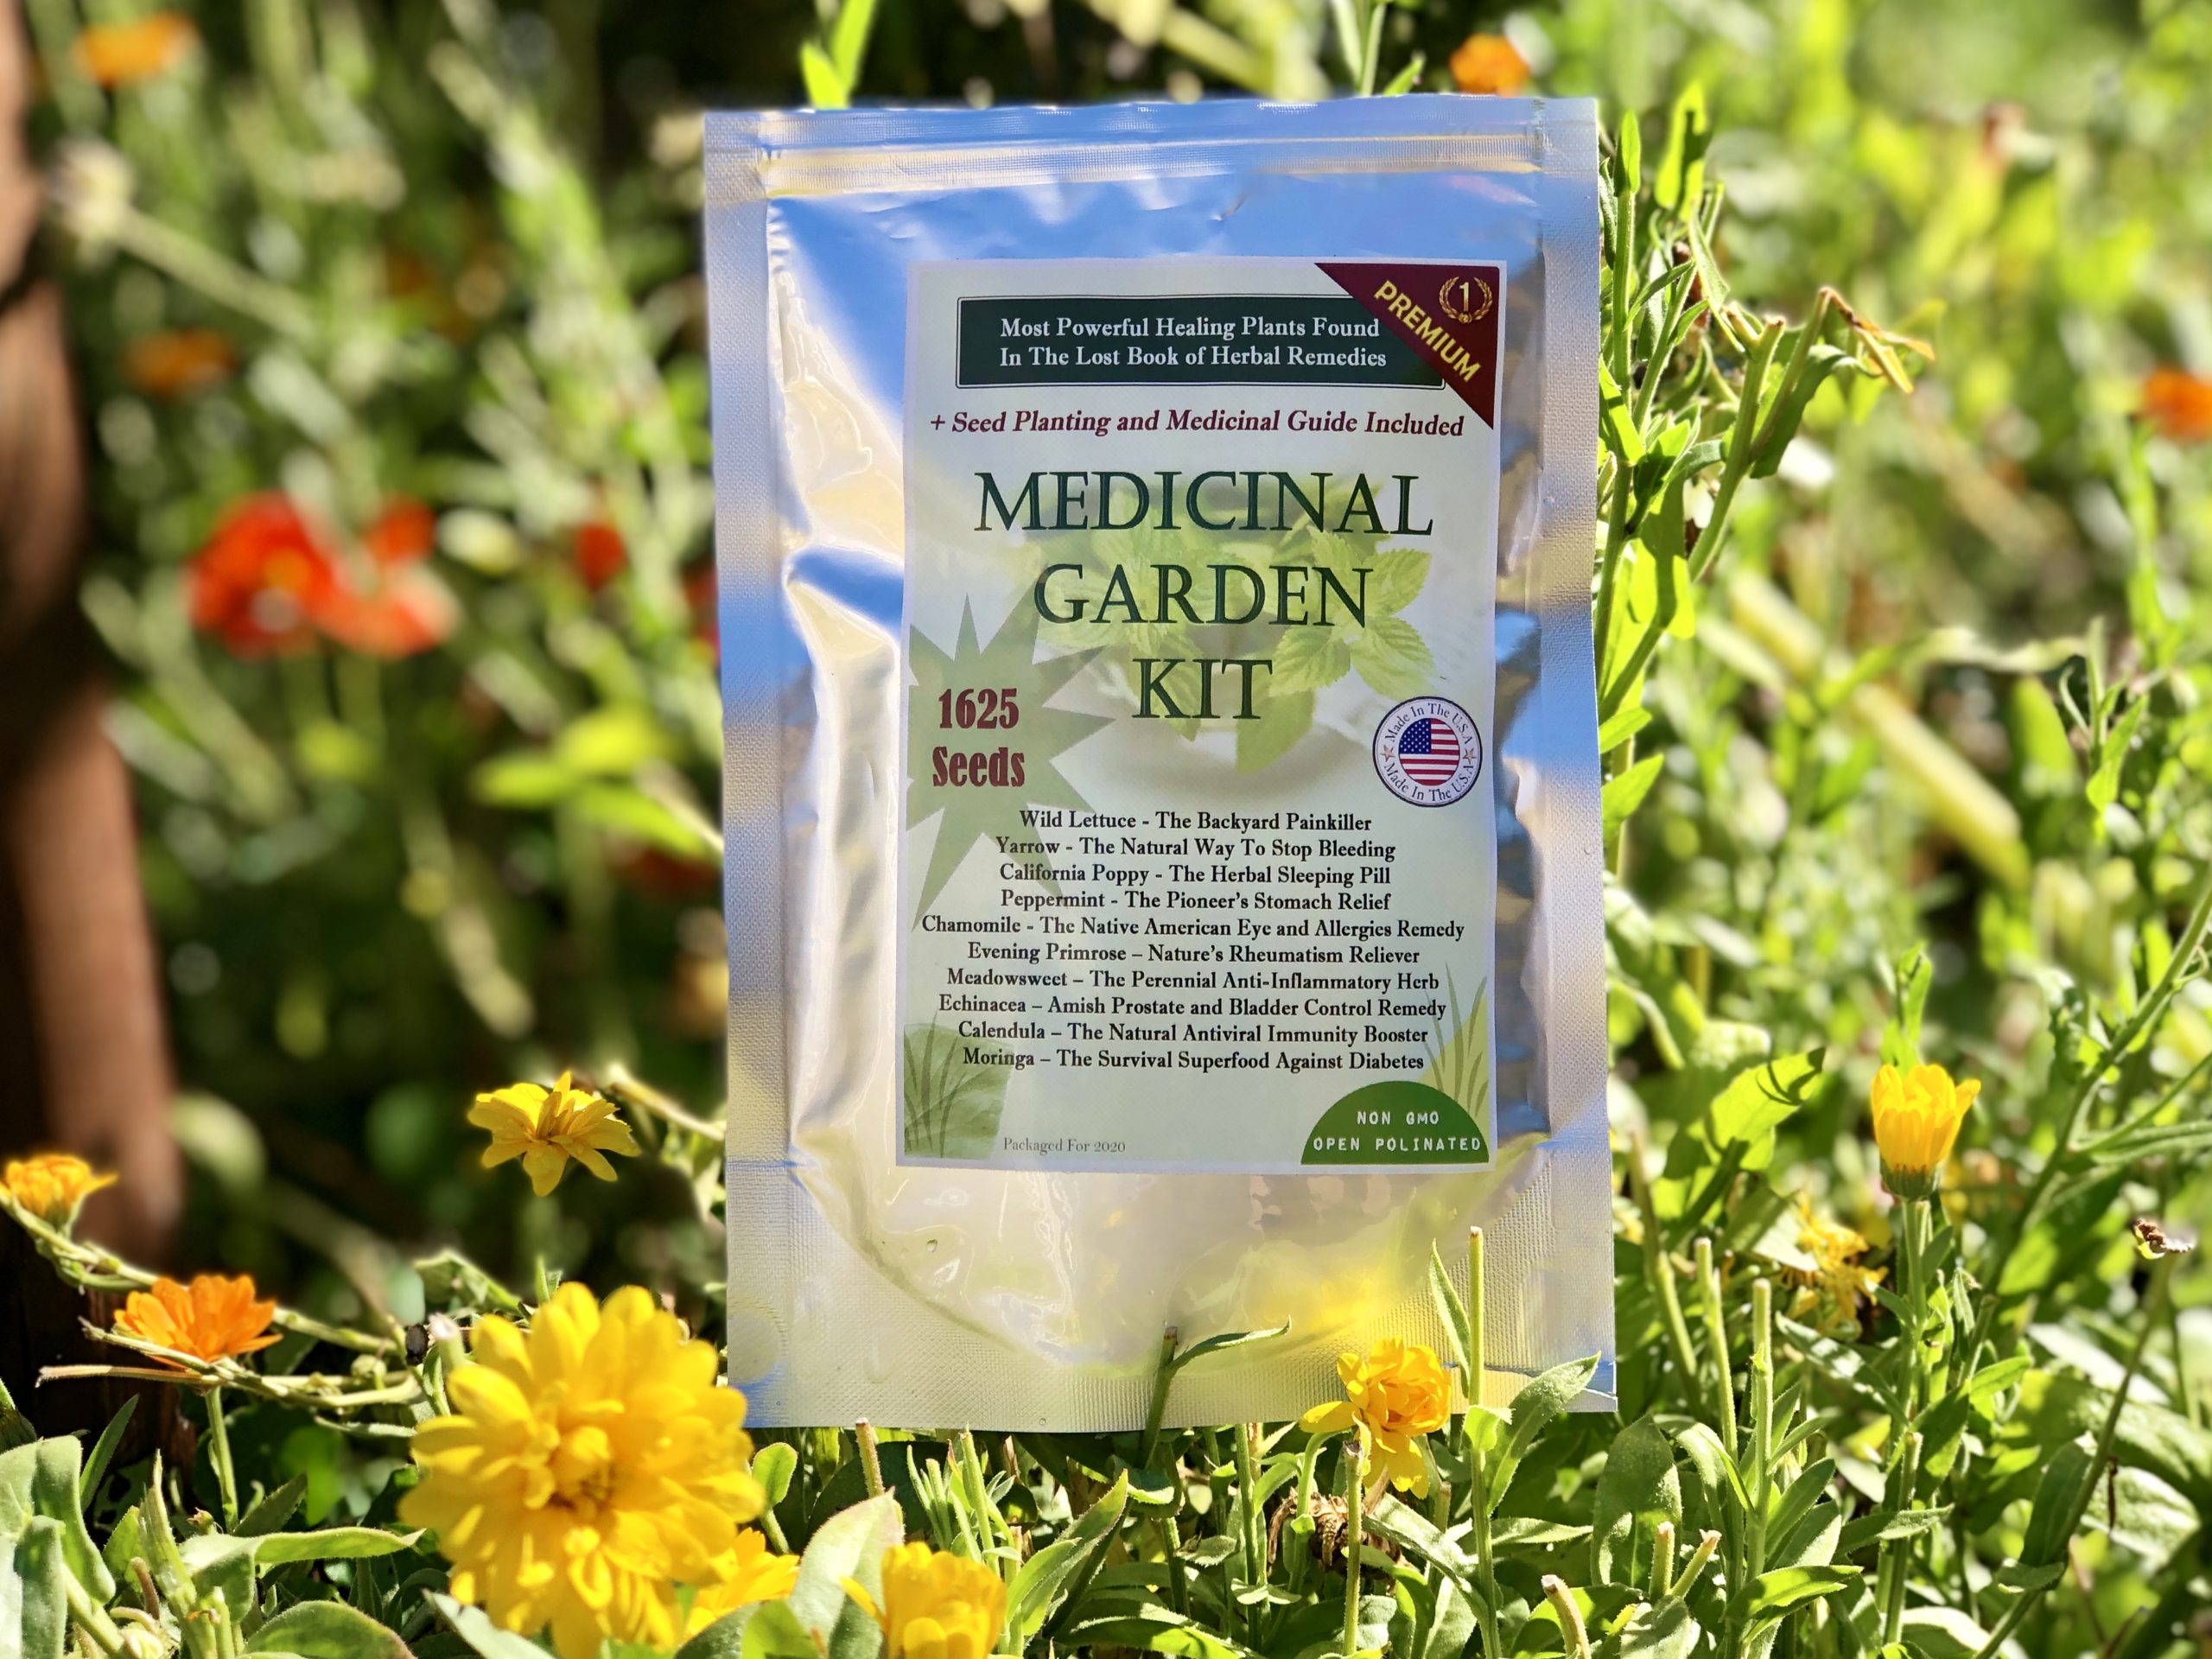 The Best 20 Examples Of Medicinal Garden Kit Review